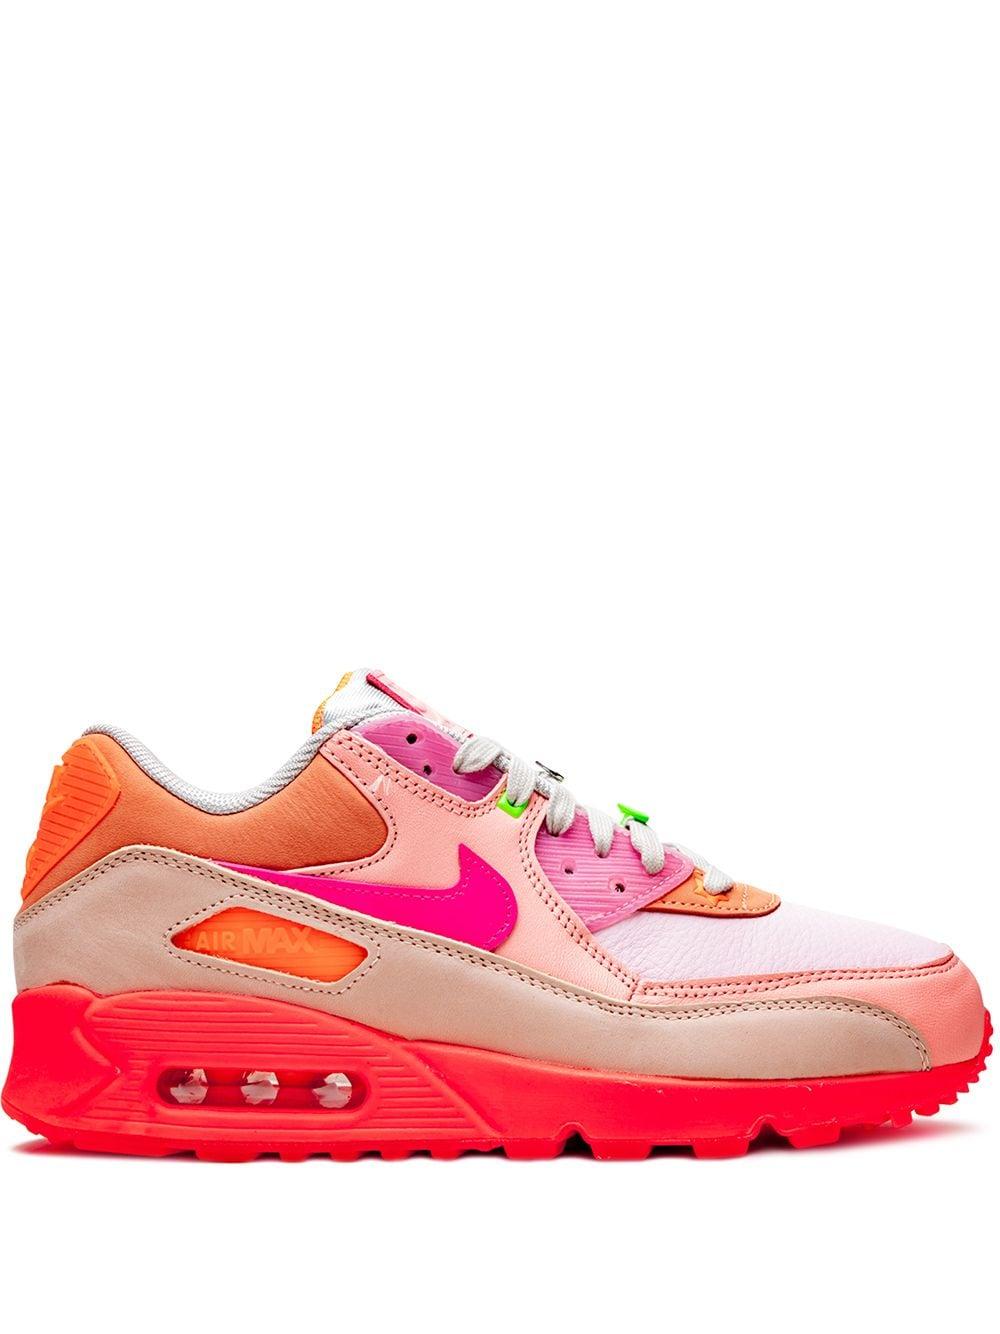 Emular dolor de estómago Encogimiento Nike Pink And Orange Air Max 90 Sneakers With Layered Design And Integrated  Air Technology. | Lyst